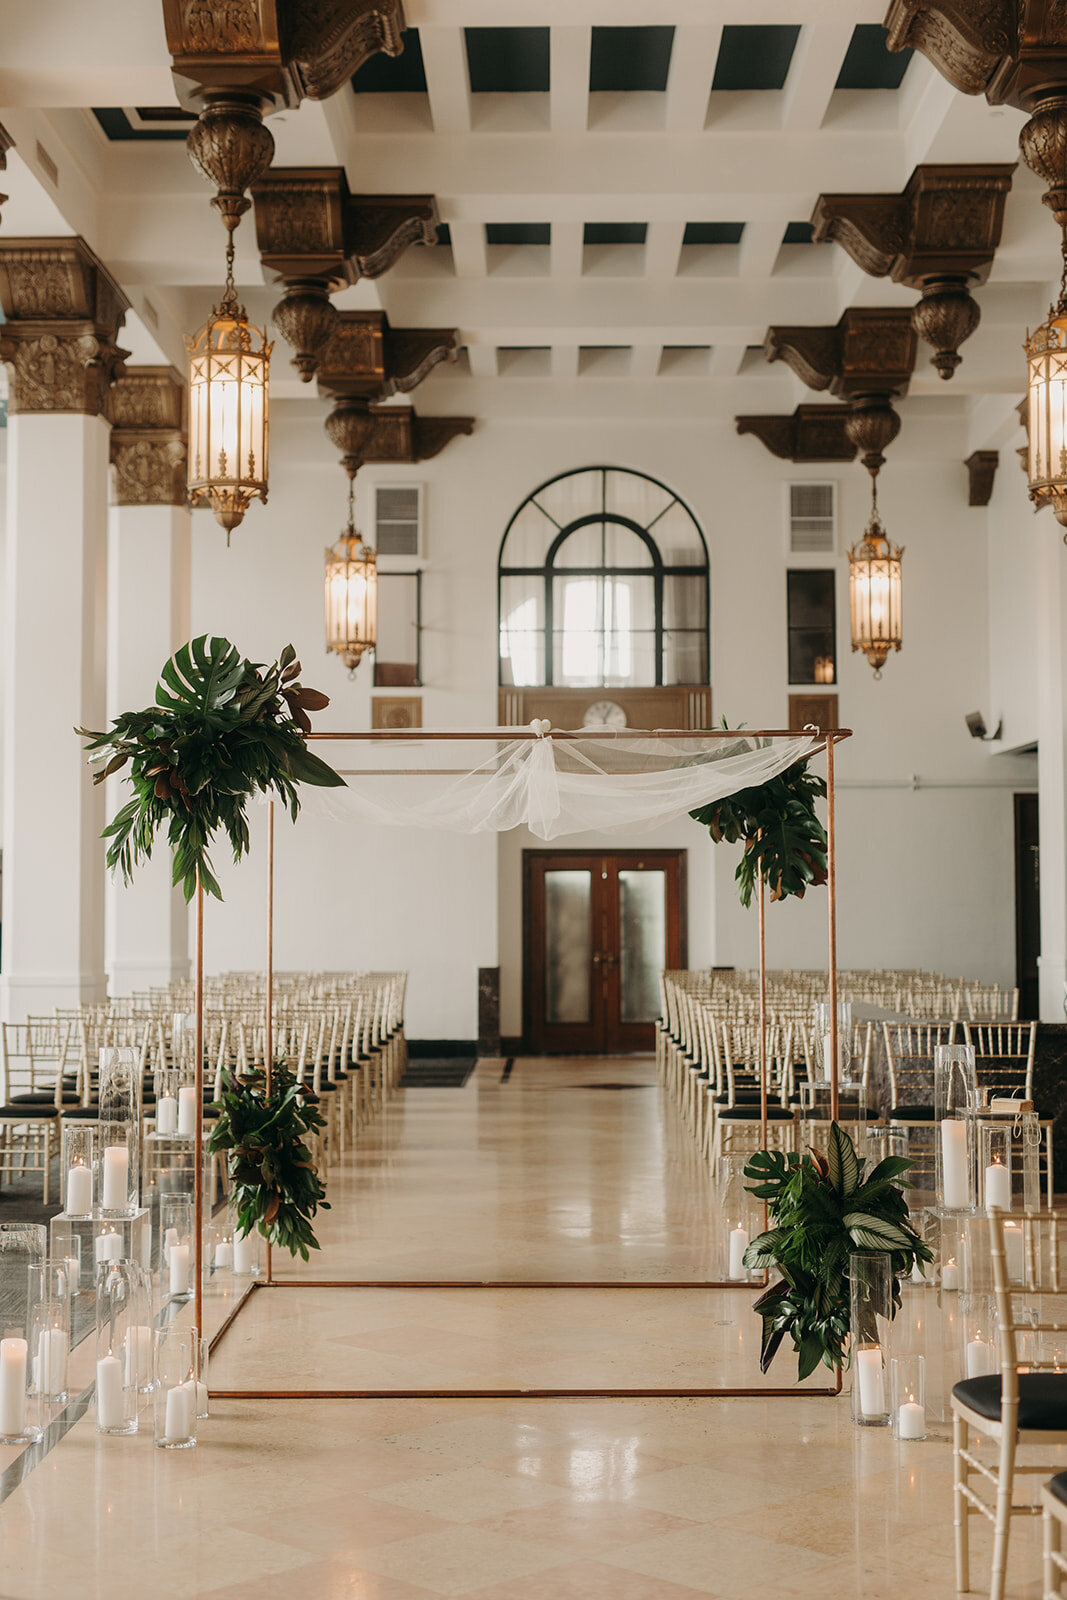 Tropical details at The  Noble wedding venue in St. Louis